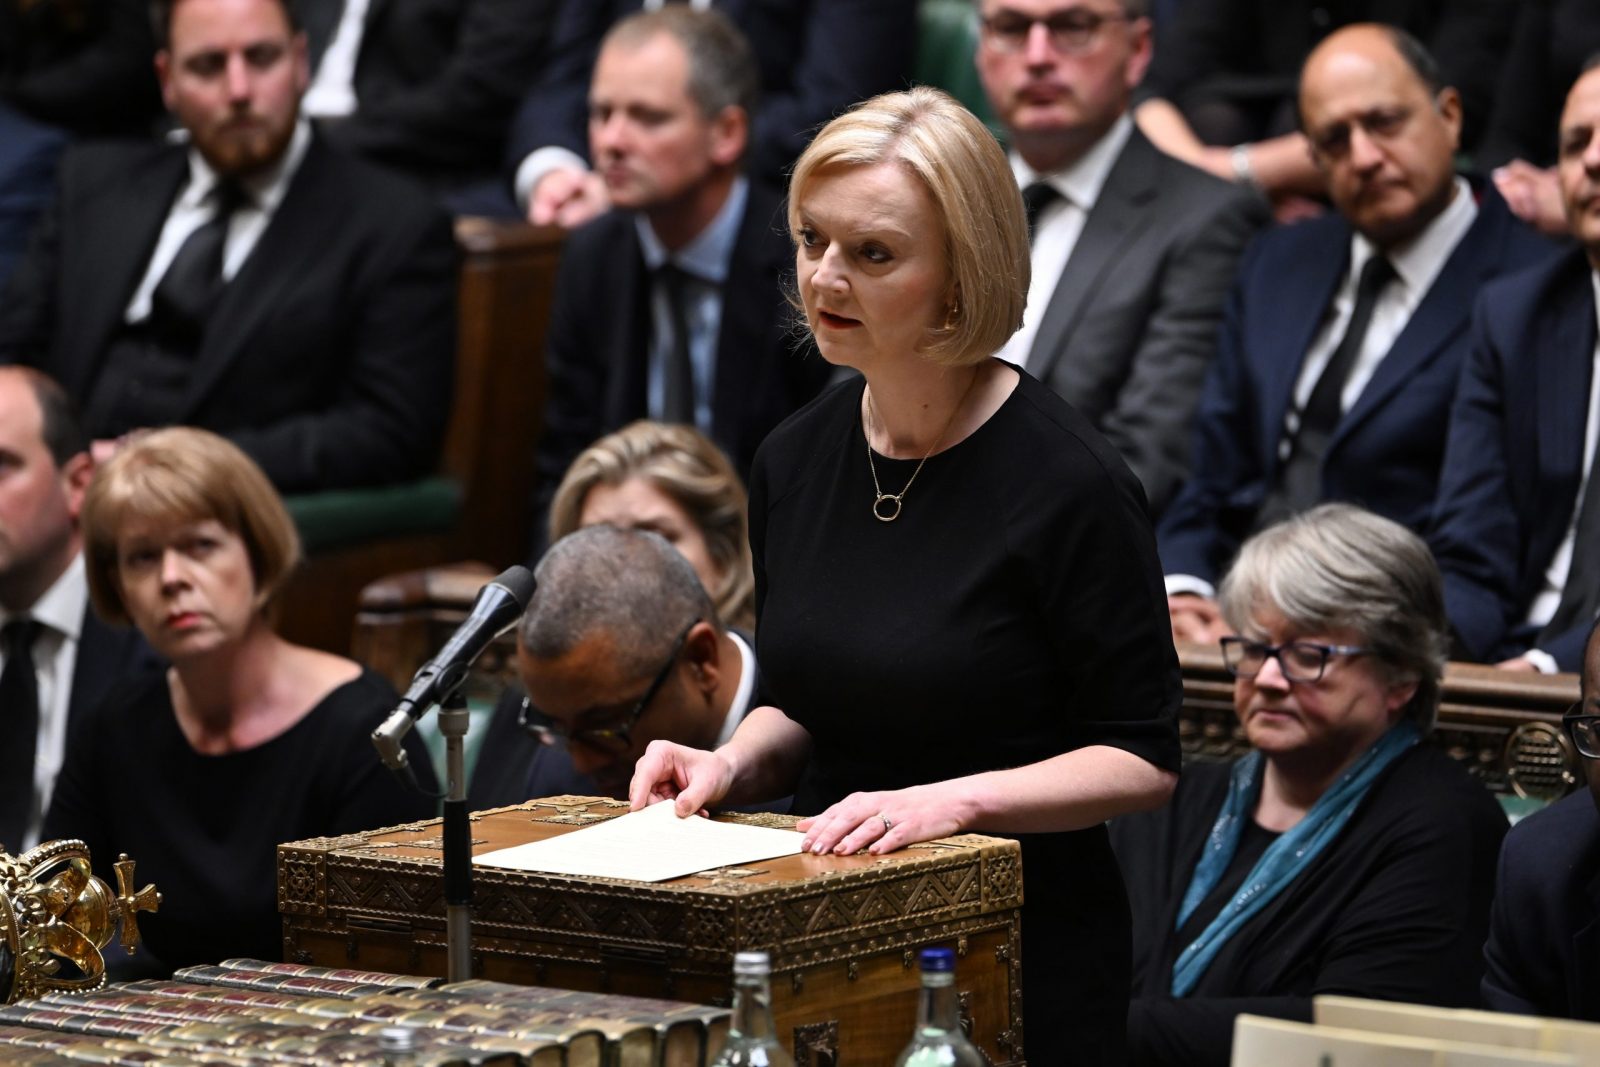 epa10174315 A handout photograph released by the UK Parliament shows British Prime Minister Liz Truss speaking as MPs pay tribute to Her late Majesty Queen Elizabeth II in the House of Commons in London, Britain, 09 September 2022. Britain's Queen Elizabeth II died at her Scottish estate on 08 September 2022. The 96-year-old queen was the longest-reigning monarch in British history.  EPA/UK PARLIAMENT/JESSICA TAYLOR HANDOUT -- MANDATORY CREDIT: UK PARLIAMENT/JESSICA TAYLOR -- HANDOUT EDITORIAL USE ONLY/NO SALES